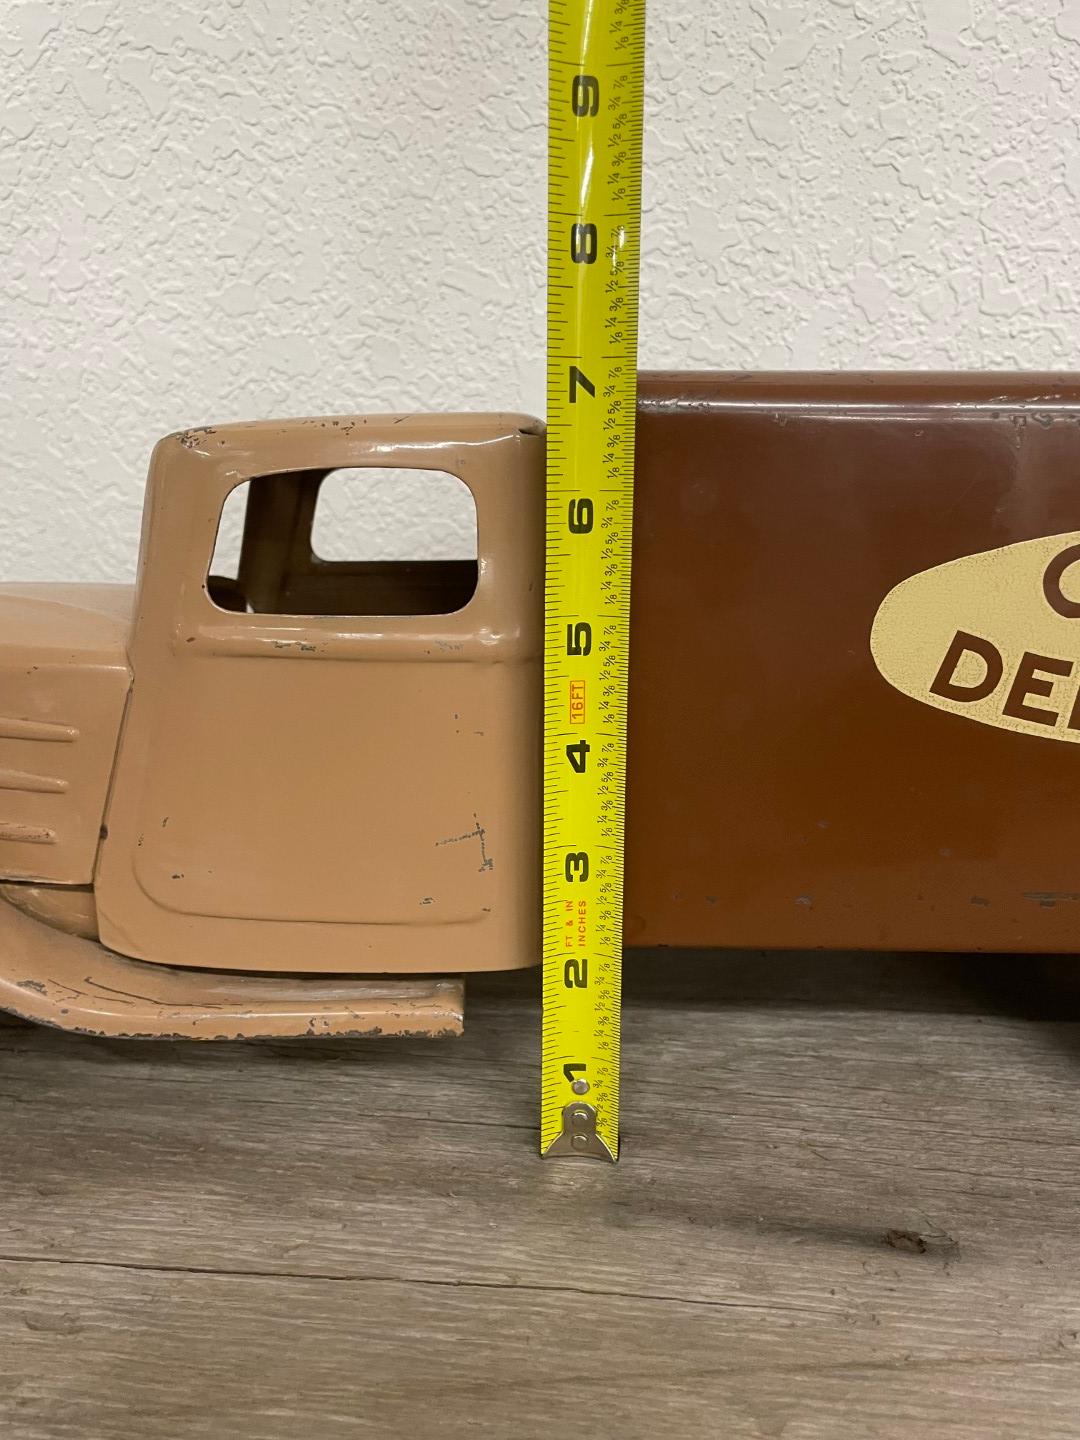 Steelcraft City Delivery Box Truck original pressed steel